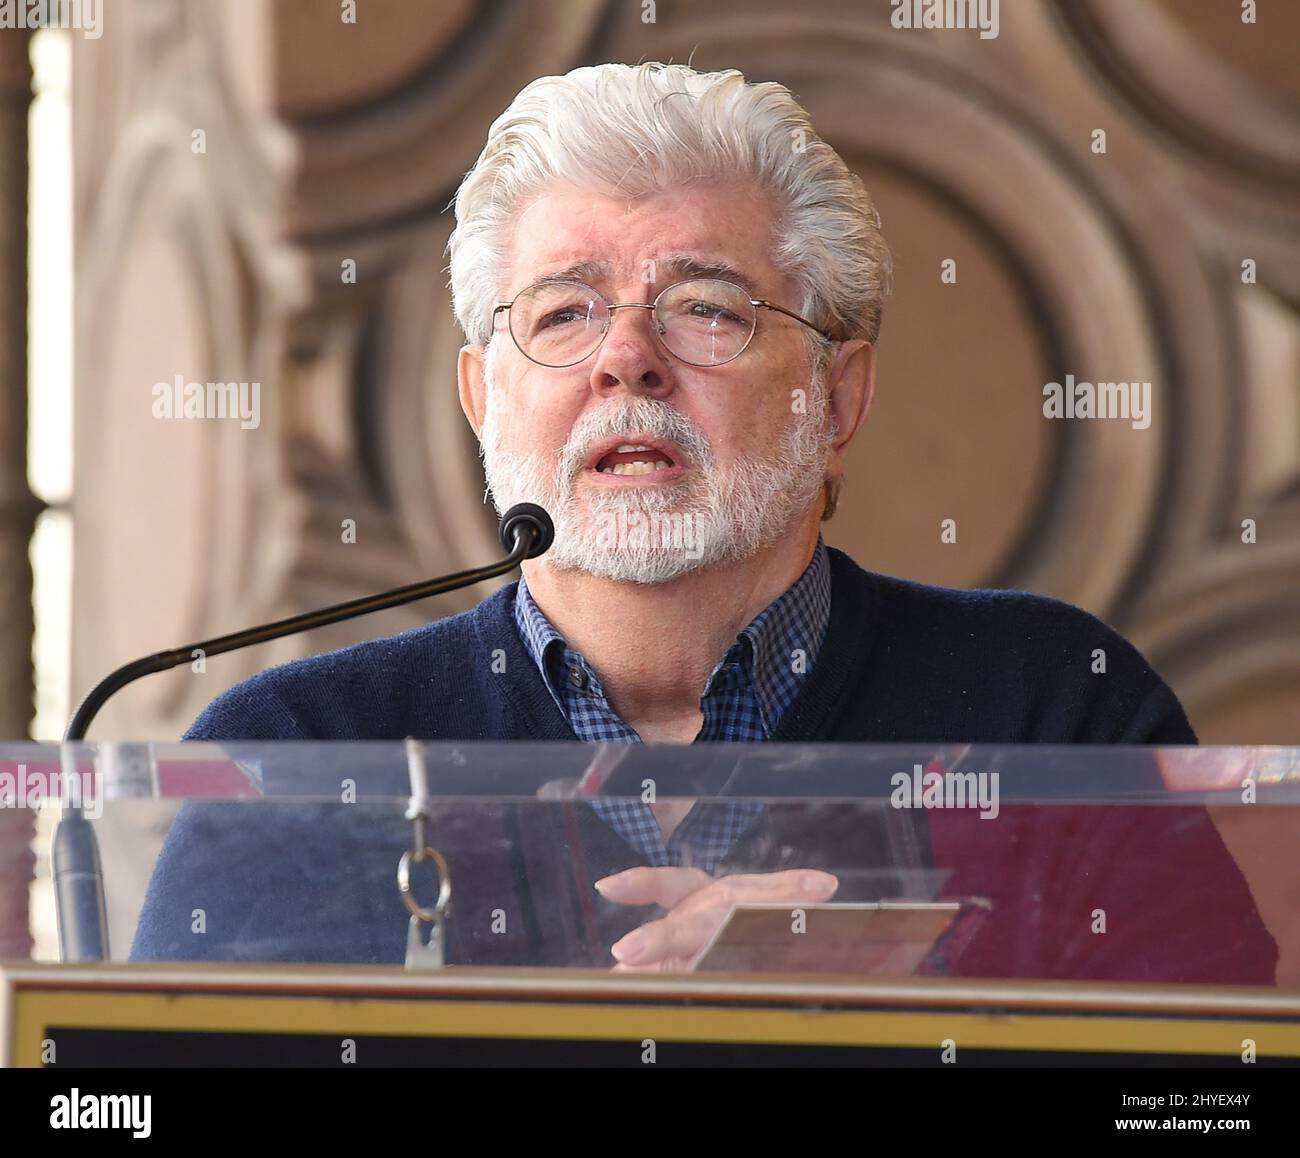 George Lucas at the Mark Hamill Hollywood Walk of Fame star ceremony held on Hollywood Blvd on March 8th, 2018 Stock Photo